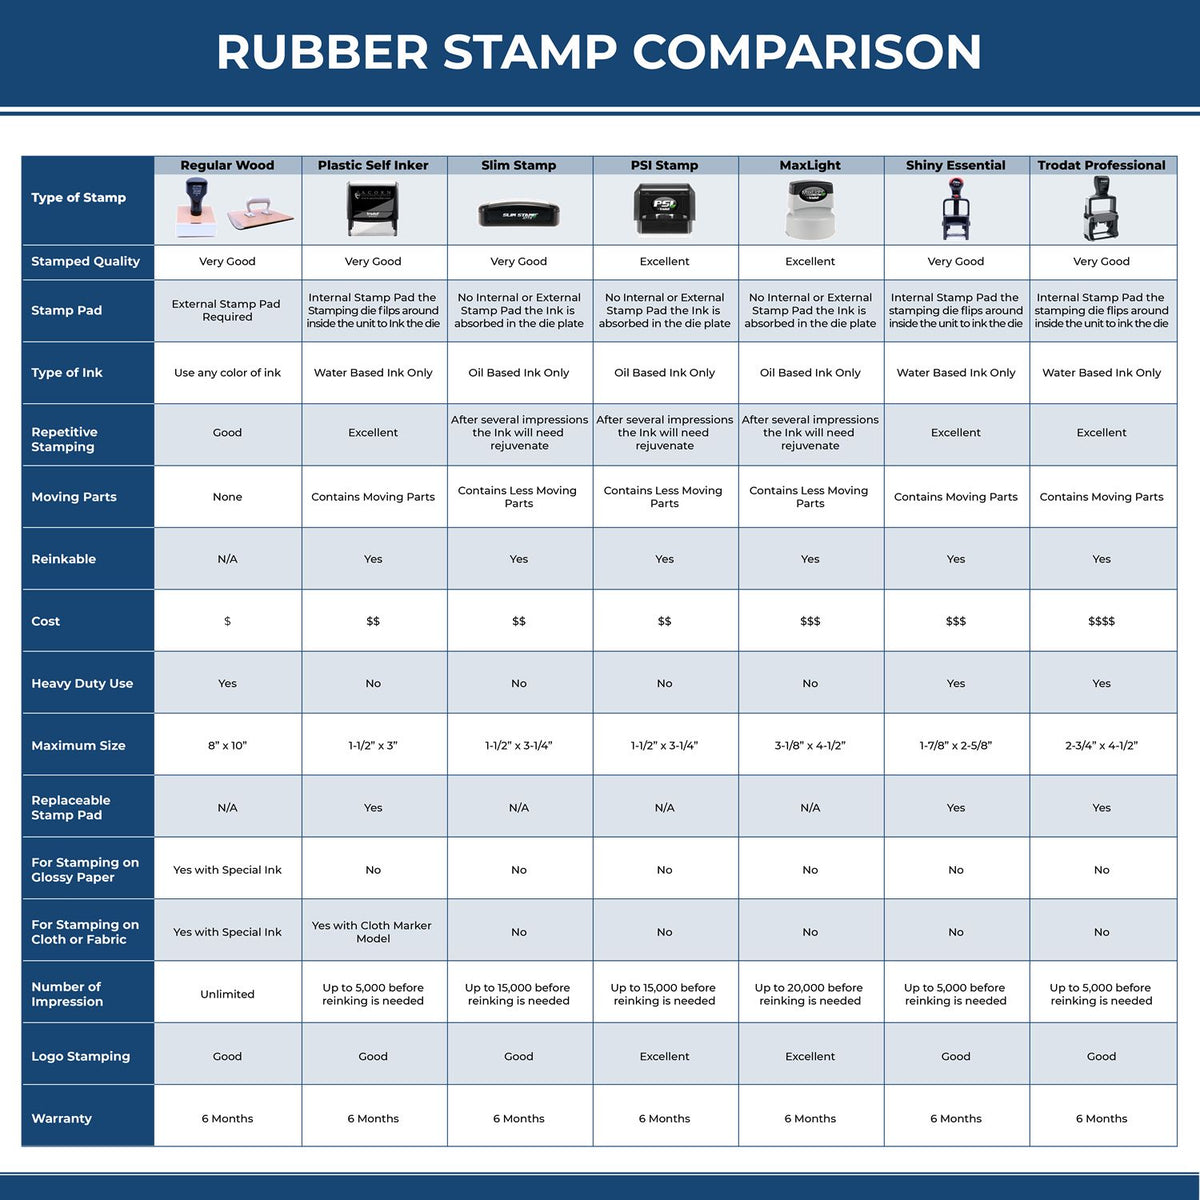 Large To The Parents Of Rubber Stamp 4663R Rubber Stamp Comparison